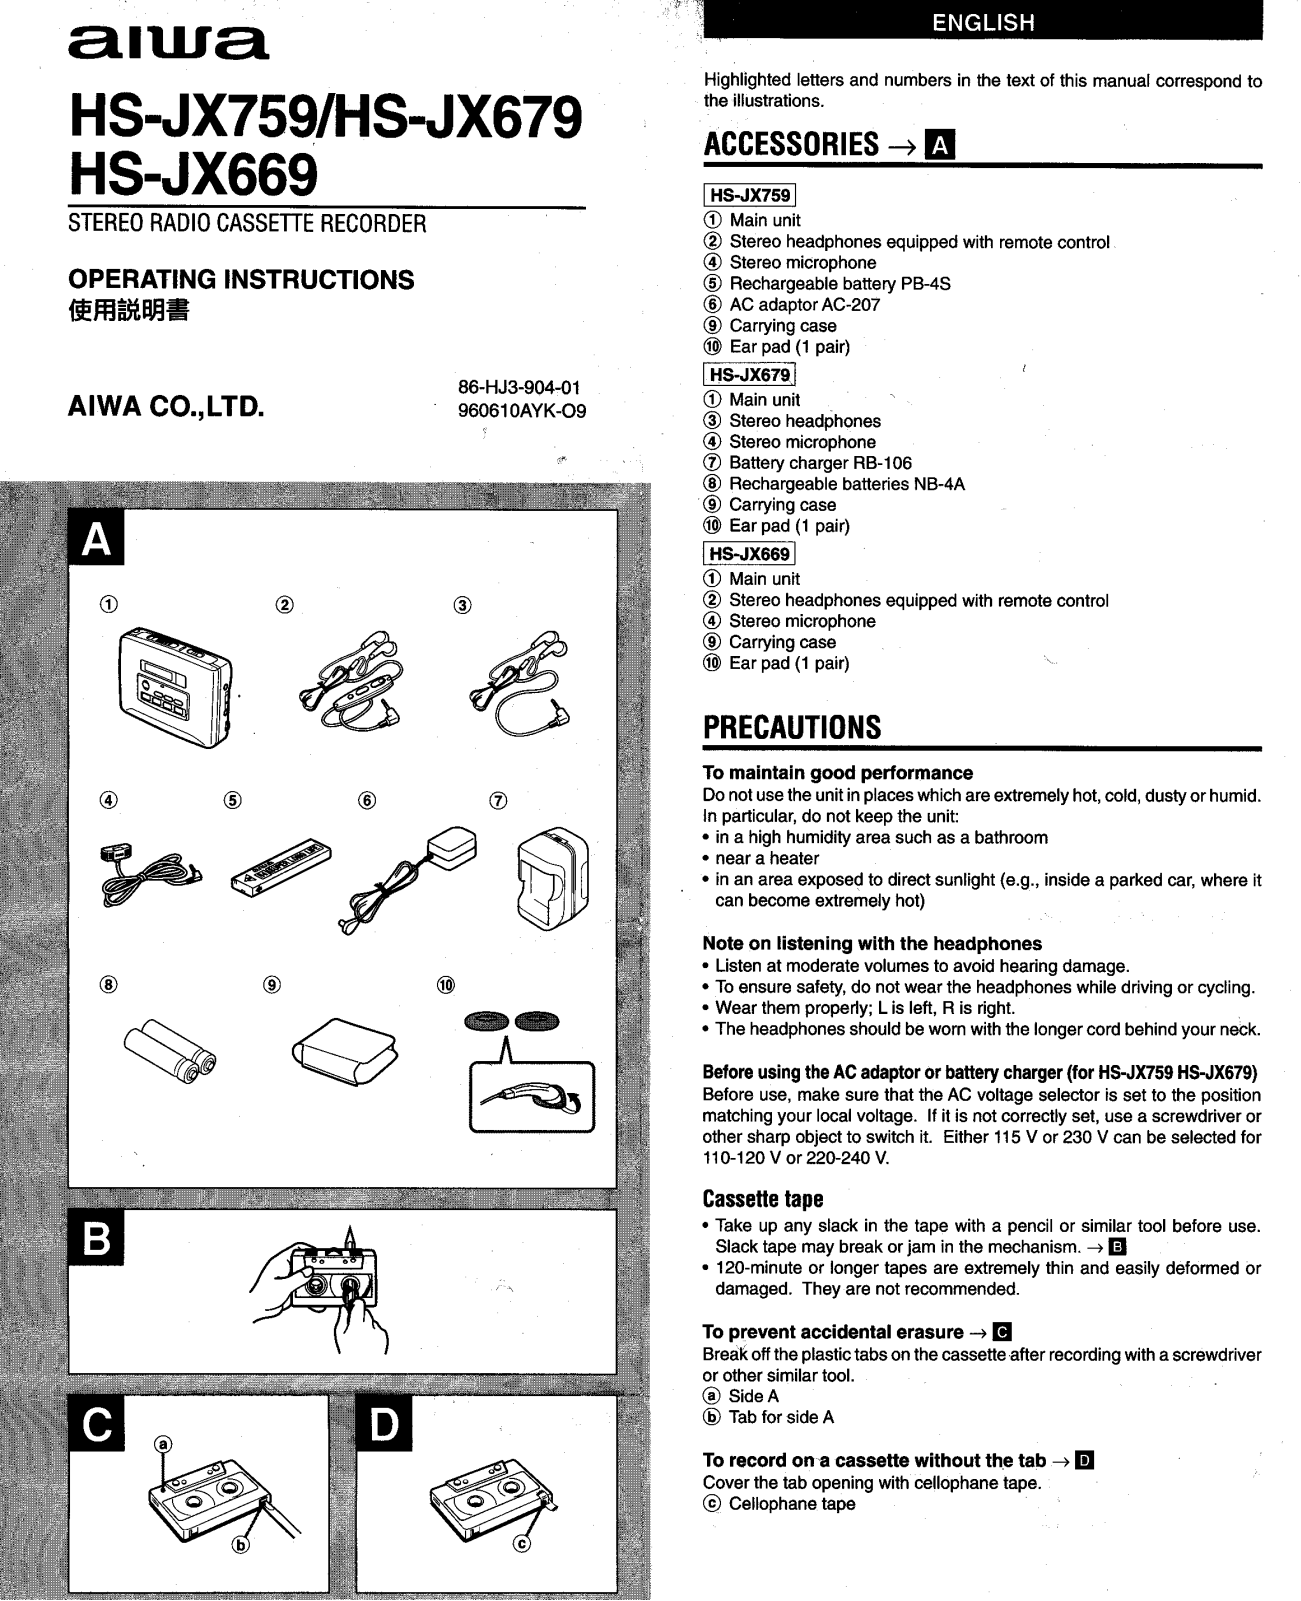 Sony hs-jx759, hs-jx679, hs-jx669 OPERATING MANUAL